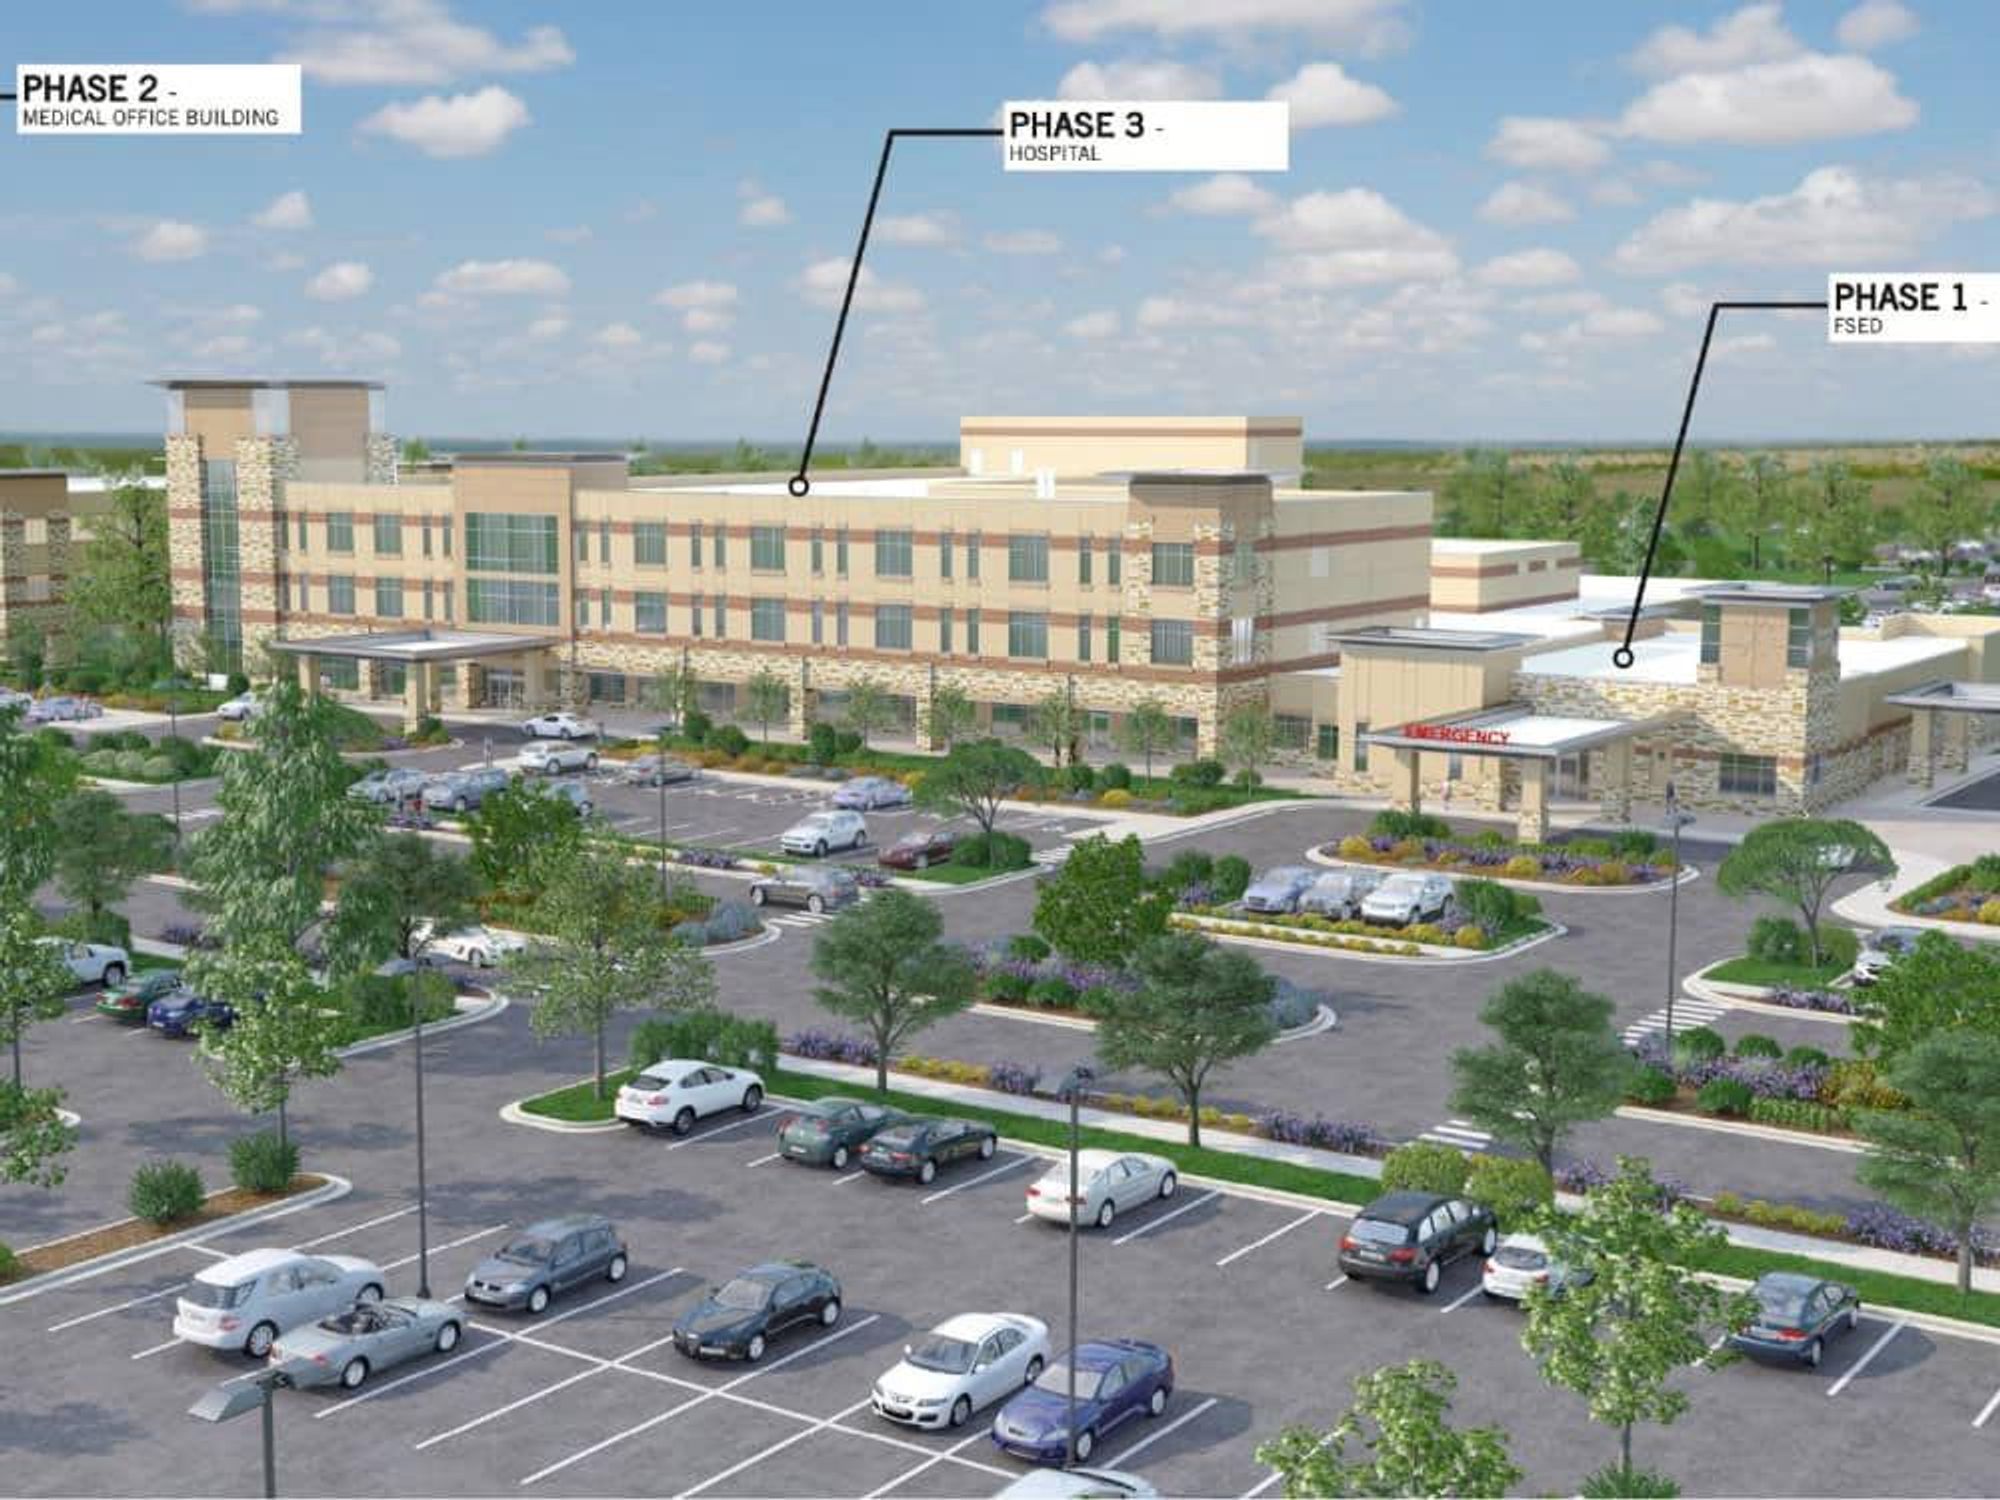 The new Leander hospital is scheduled to open in 2024.